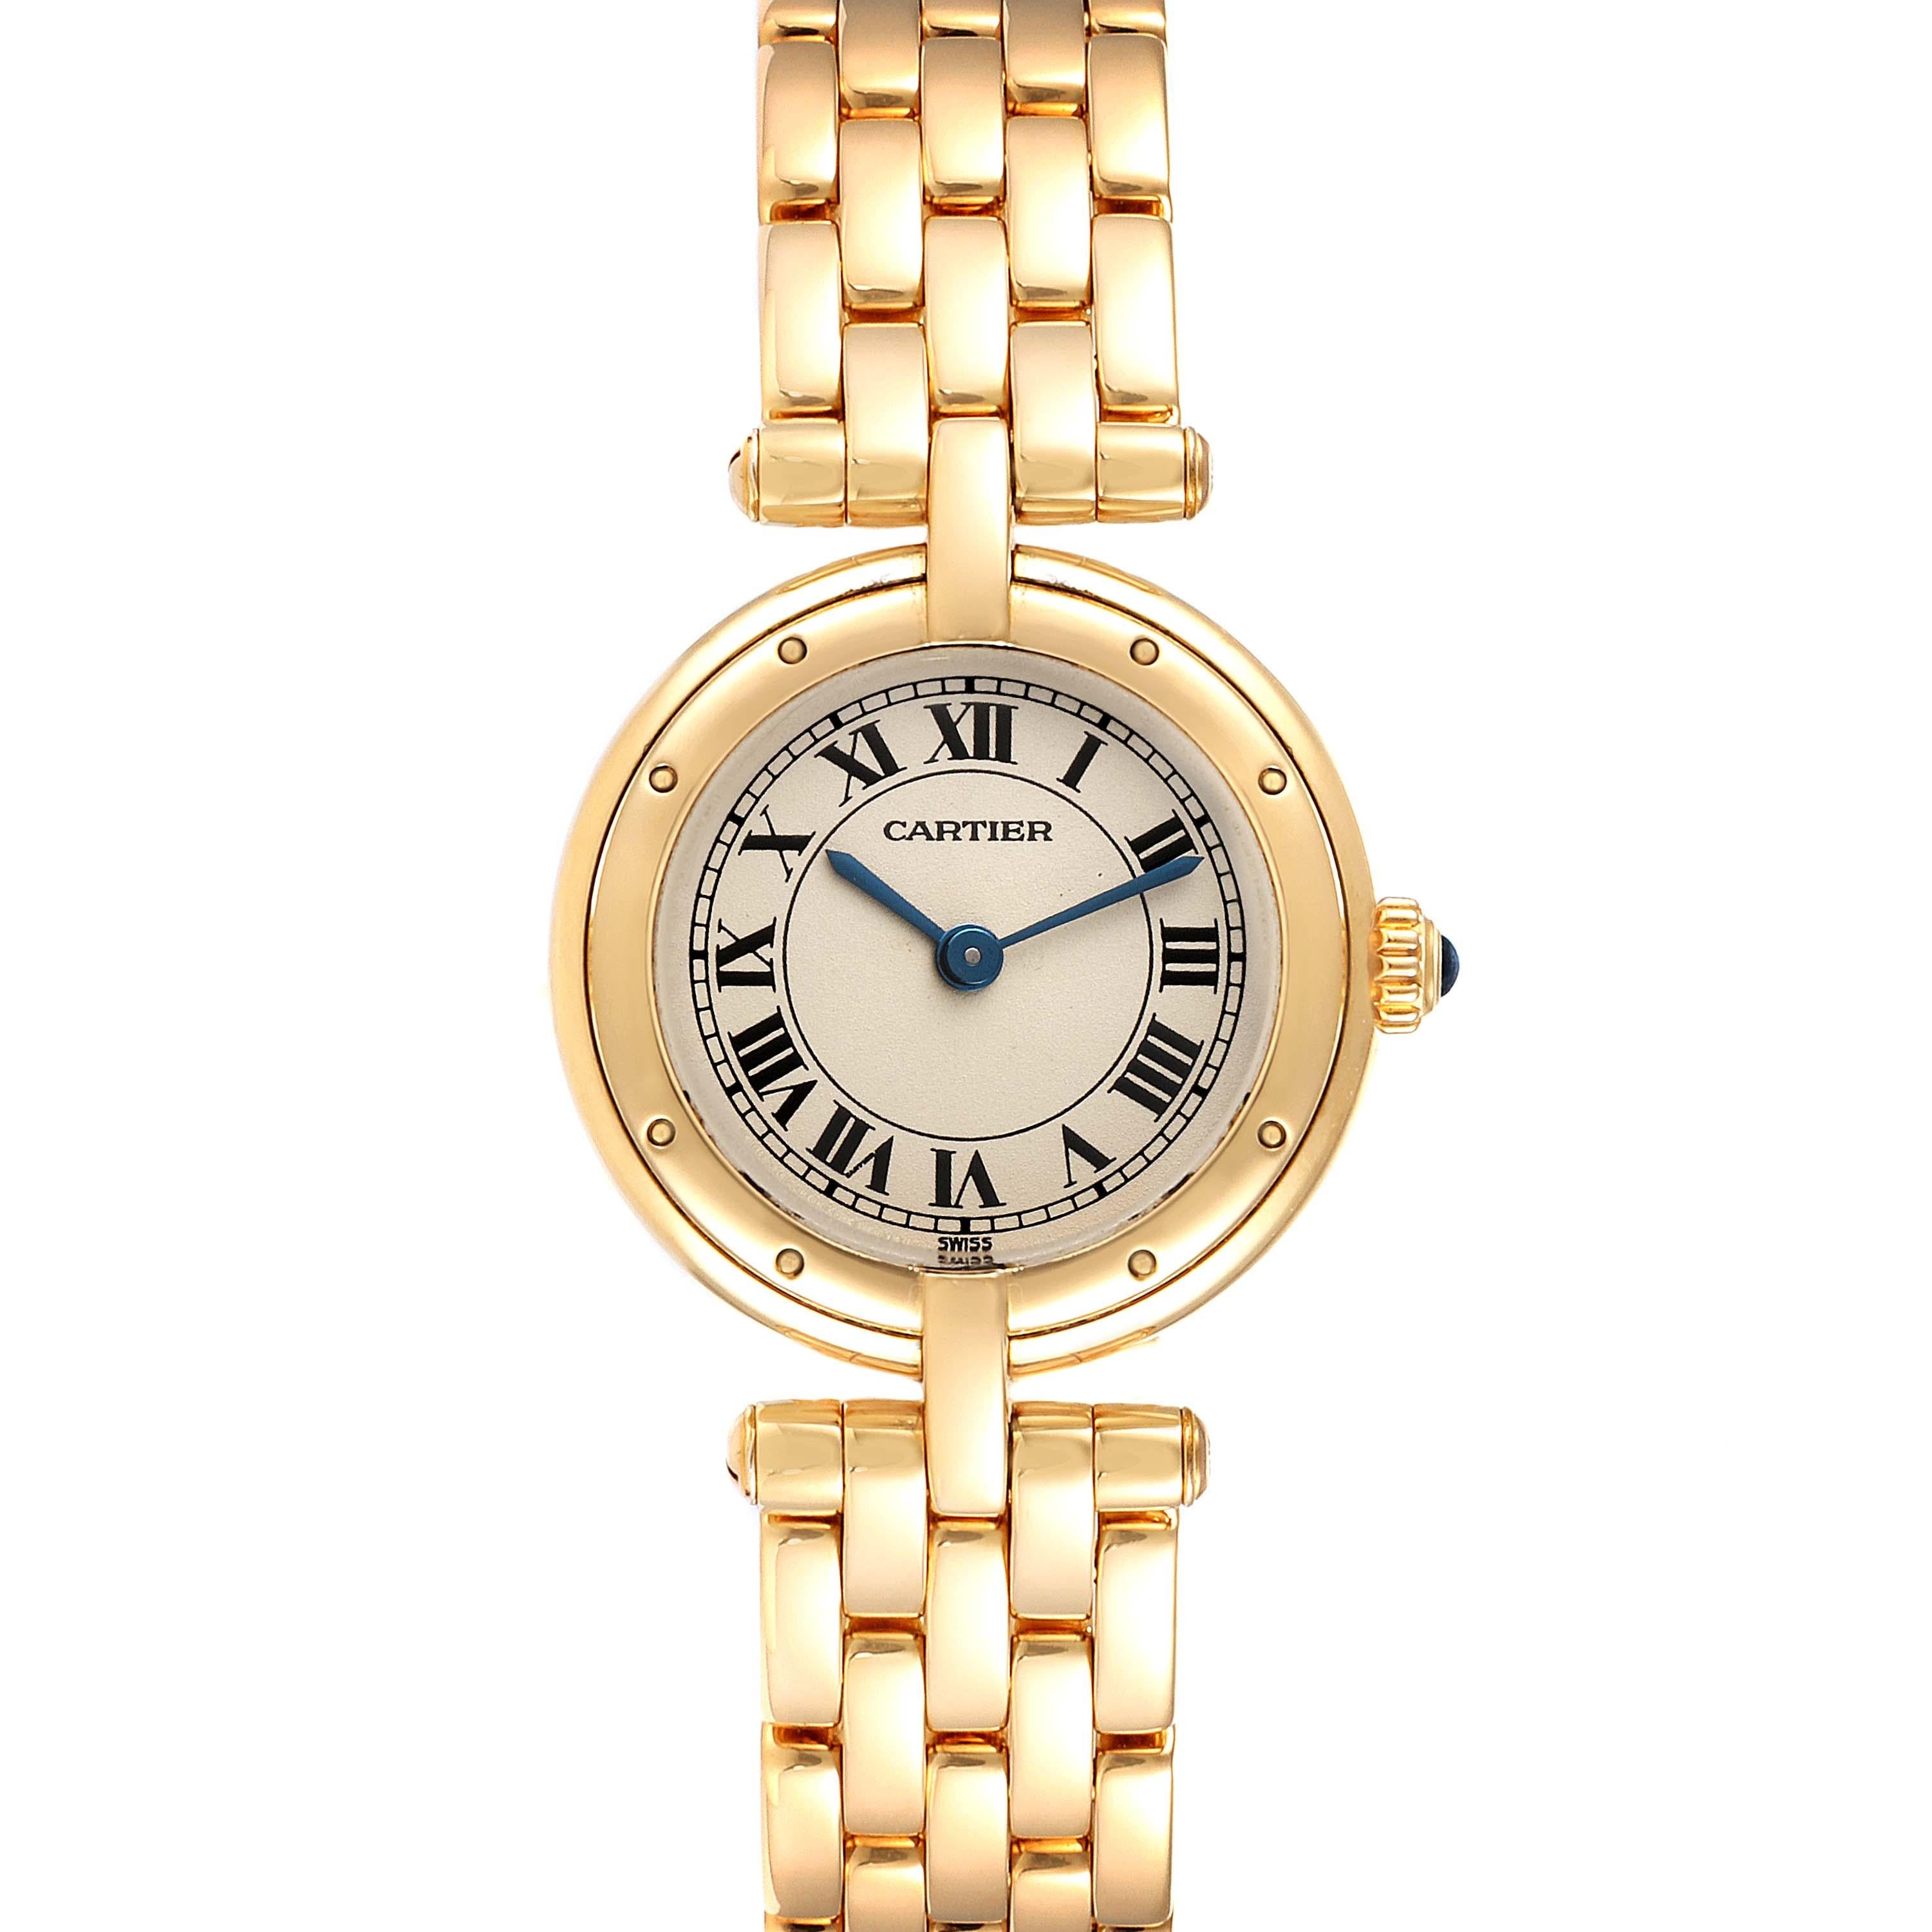 Cartier Panthere Vendome 18K Yellow Gold Ladies Watch 6692. Quartz movement. 18k yellow gold round case 23 mm in diameter. Vendome lugs. Octagonal crown set with the blue sapphire cabachon. 18k yellow gold polished bezel, secured with 8 pins.